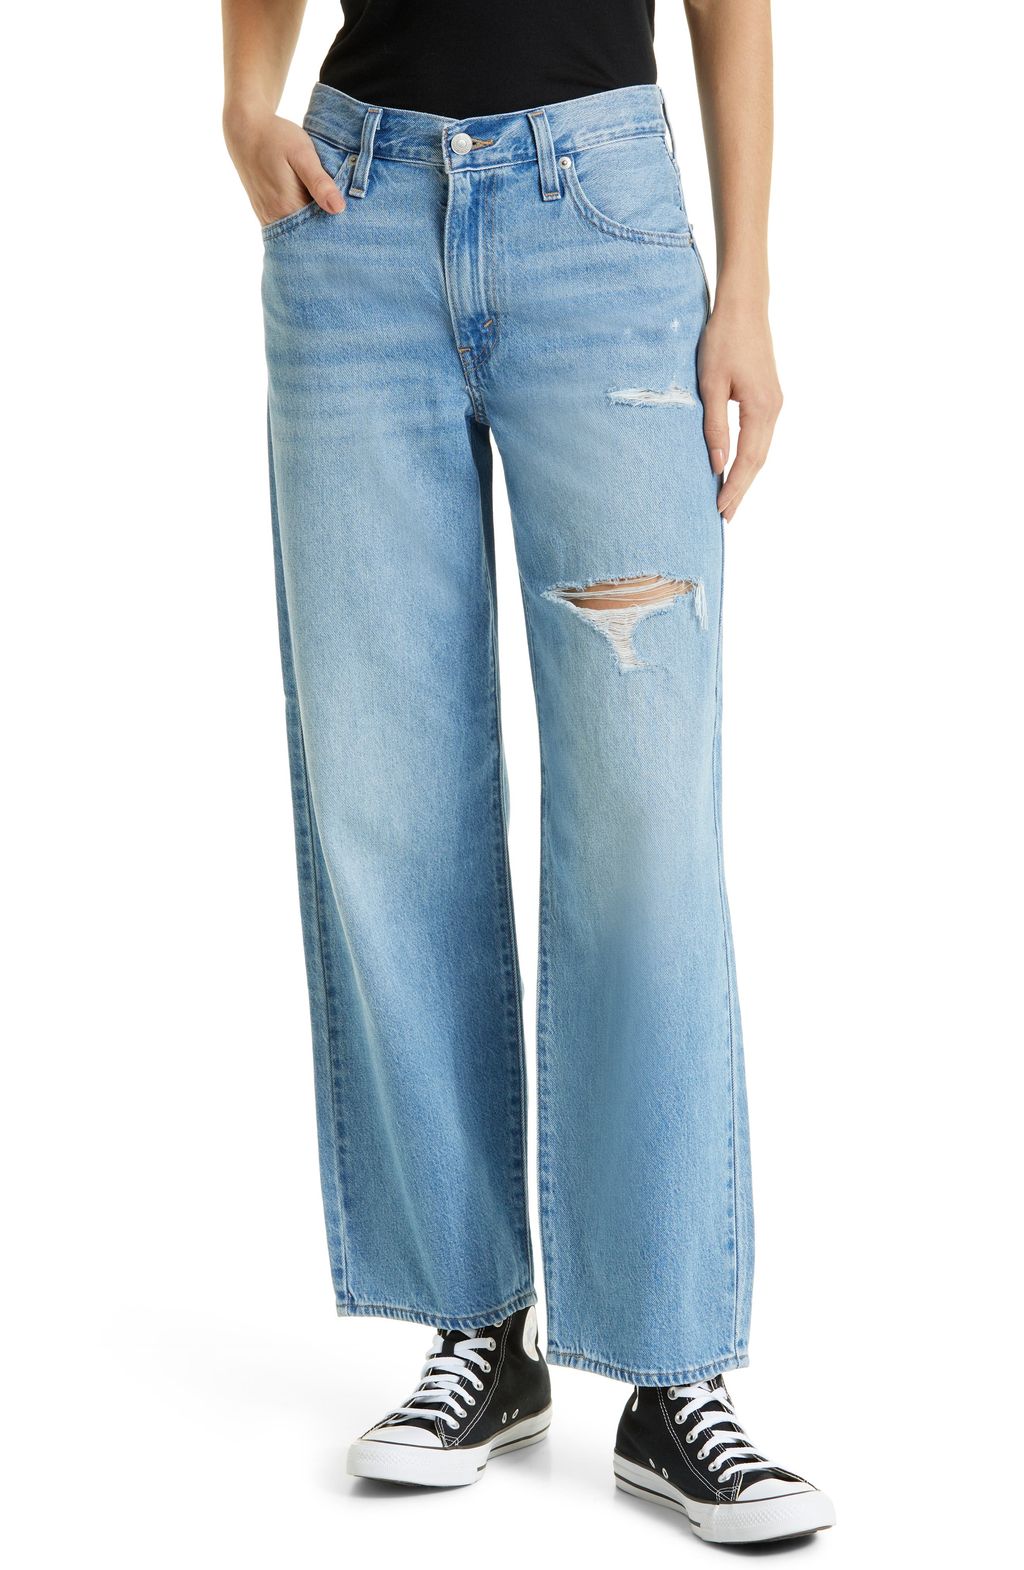 I Live In Jeans—Check Out These 6 Nordstrom Denim Brands | Who What Wear